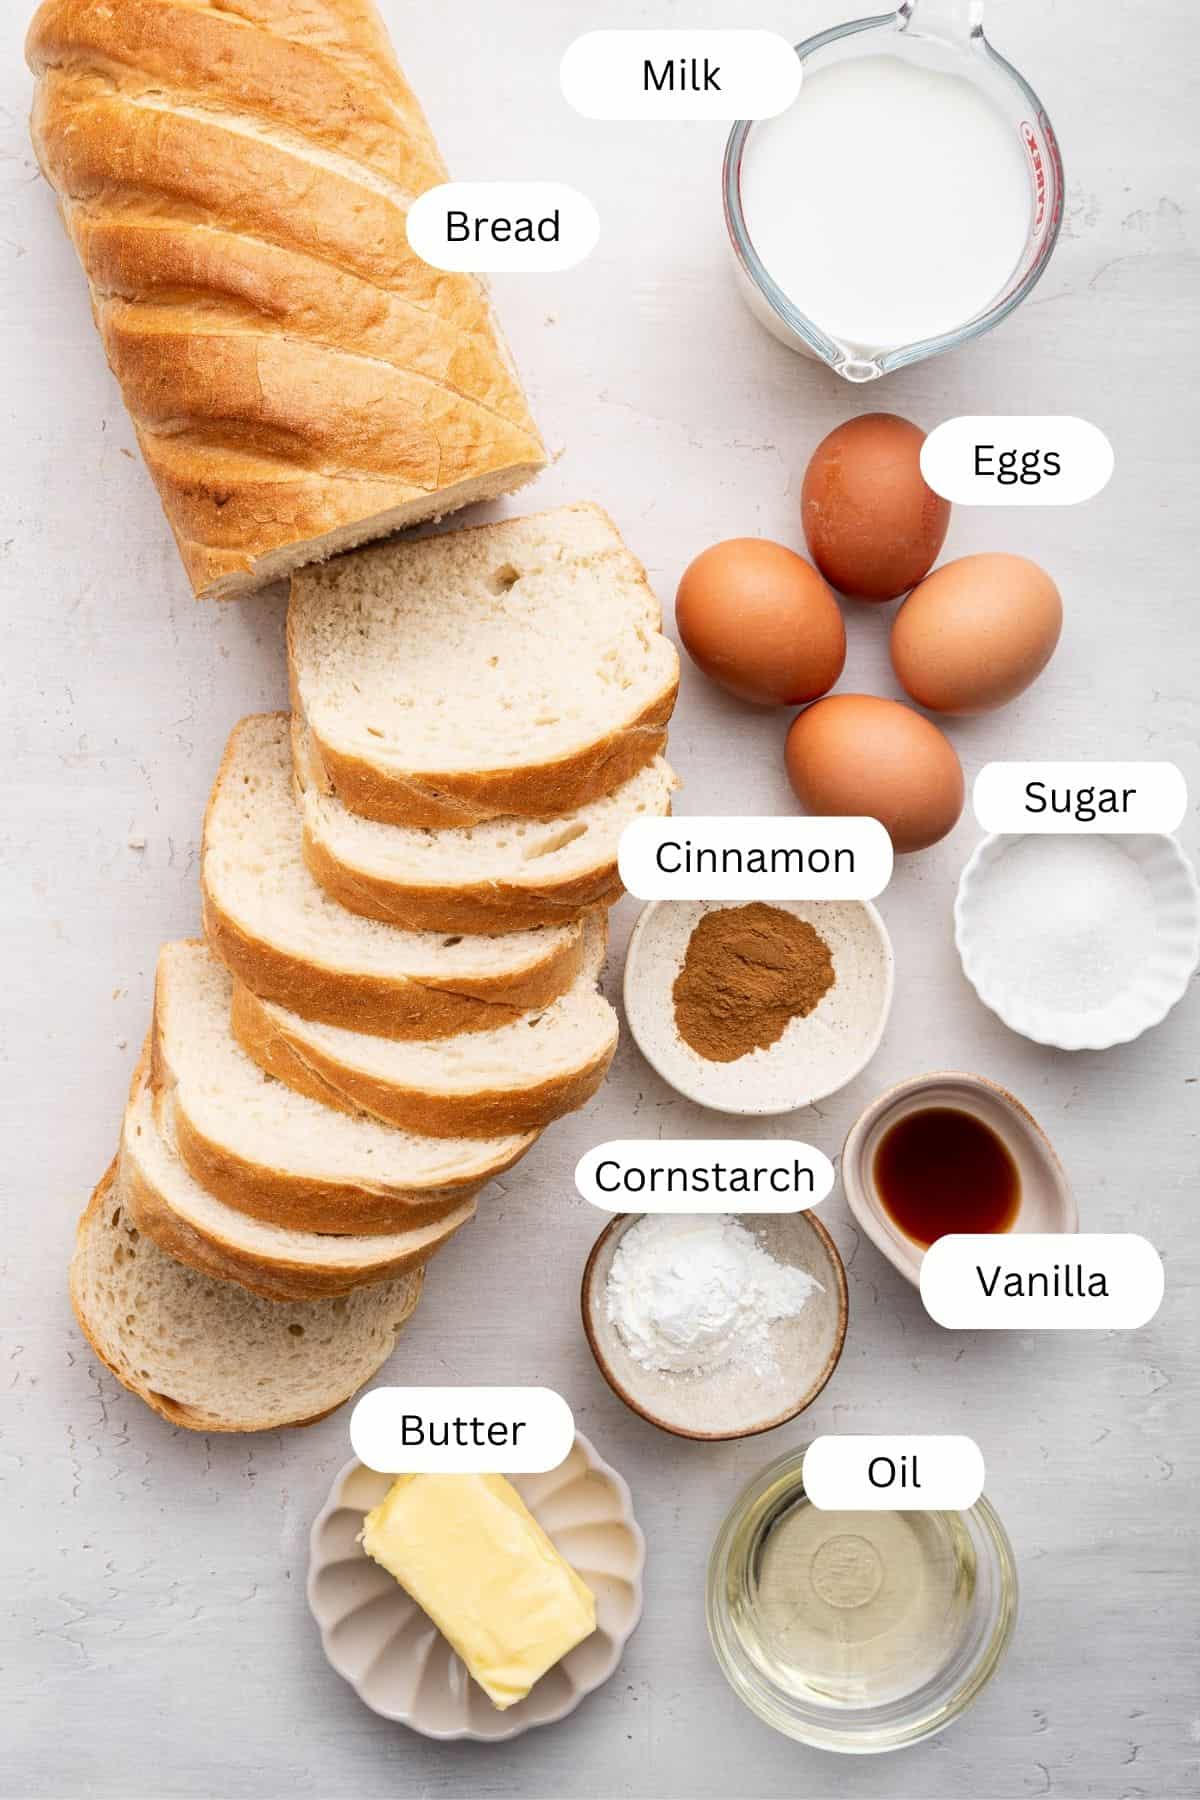 Ingredients for French toast